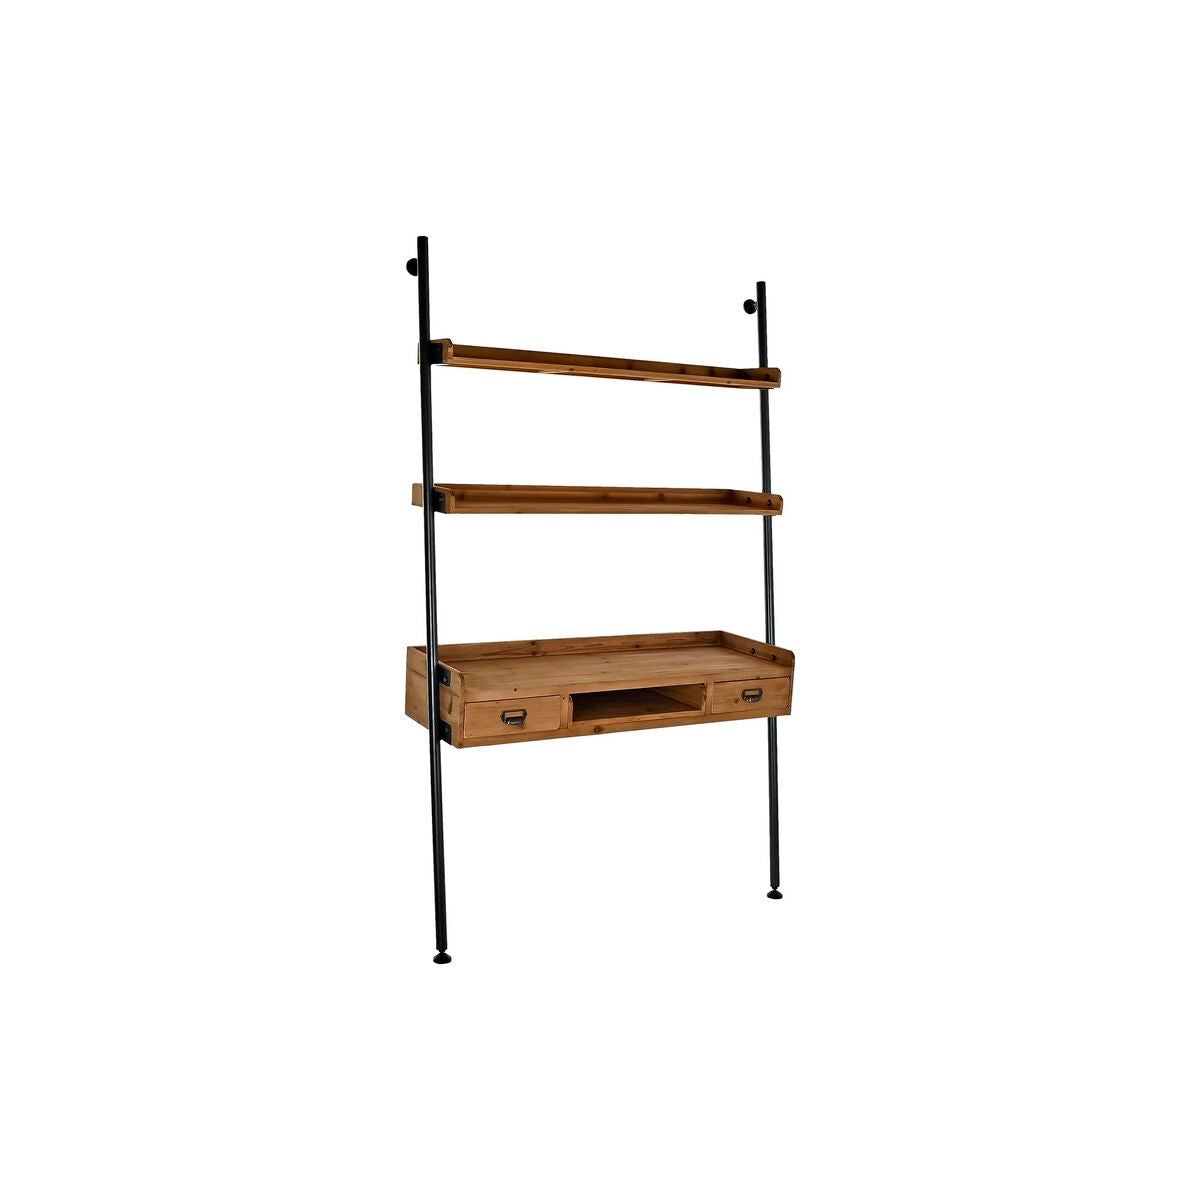 Shelving Unit with Drawers in Wood and Black Metal Structure (123 x 40 x 198 cm)